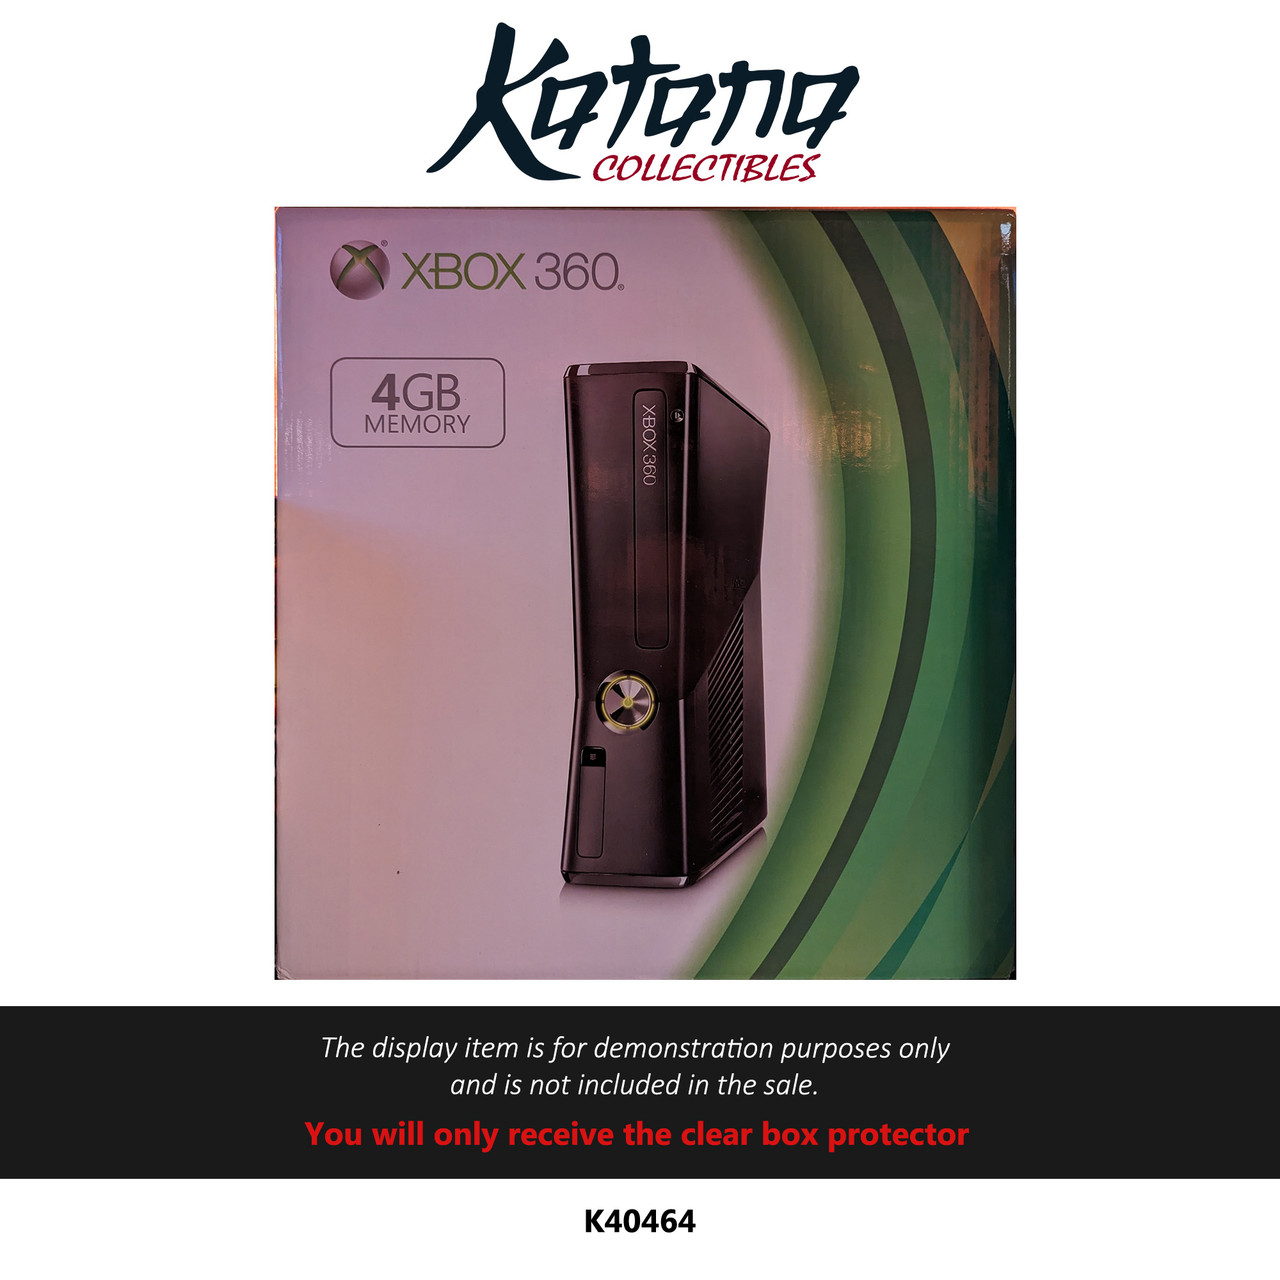 Katana Collectibles Protector For Xbox 360 4Gb Console (Slim Model)